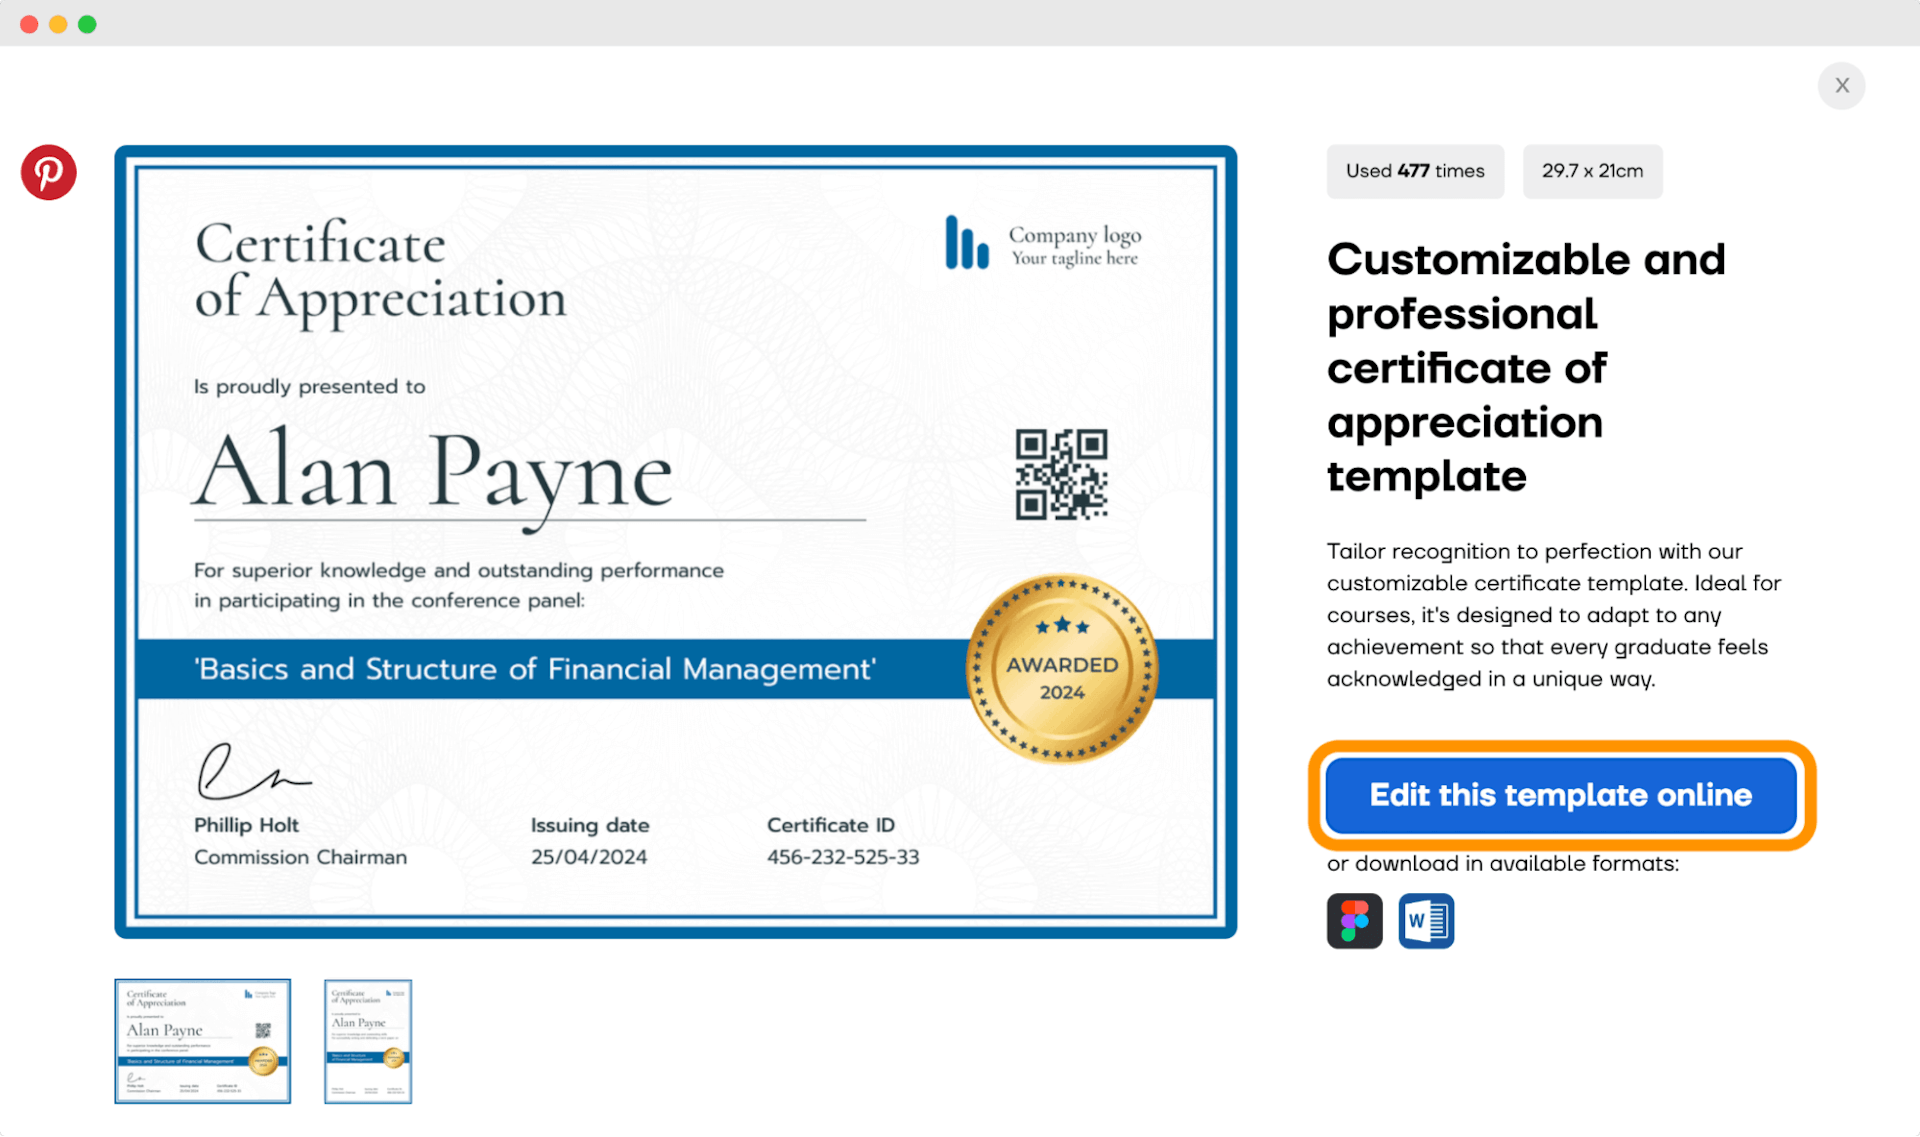 The button to edit this template online to start to make certificate of appreciation.